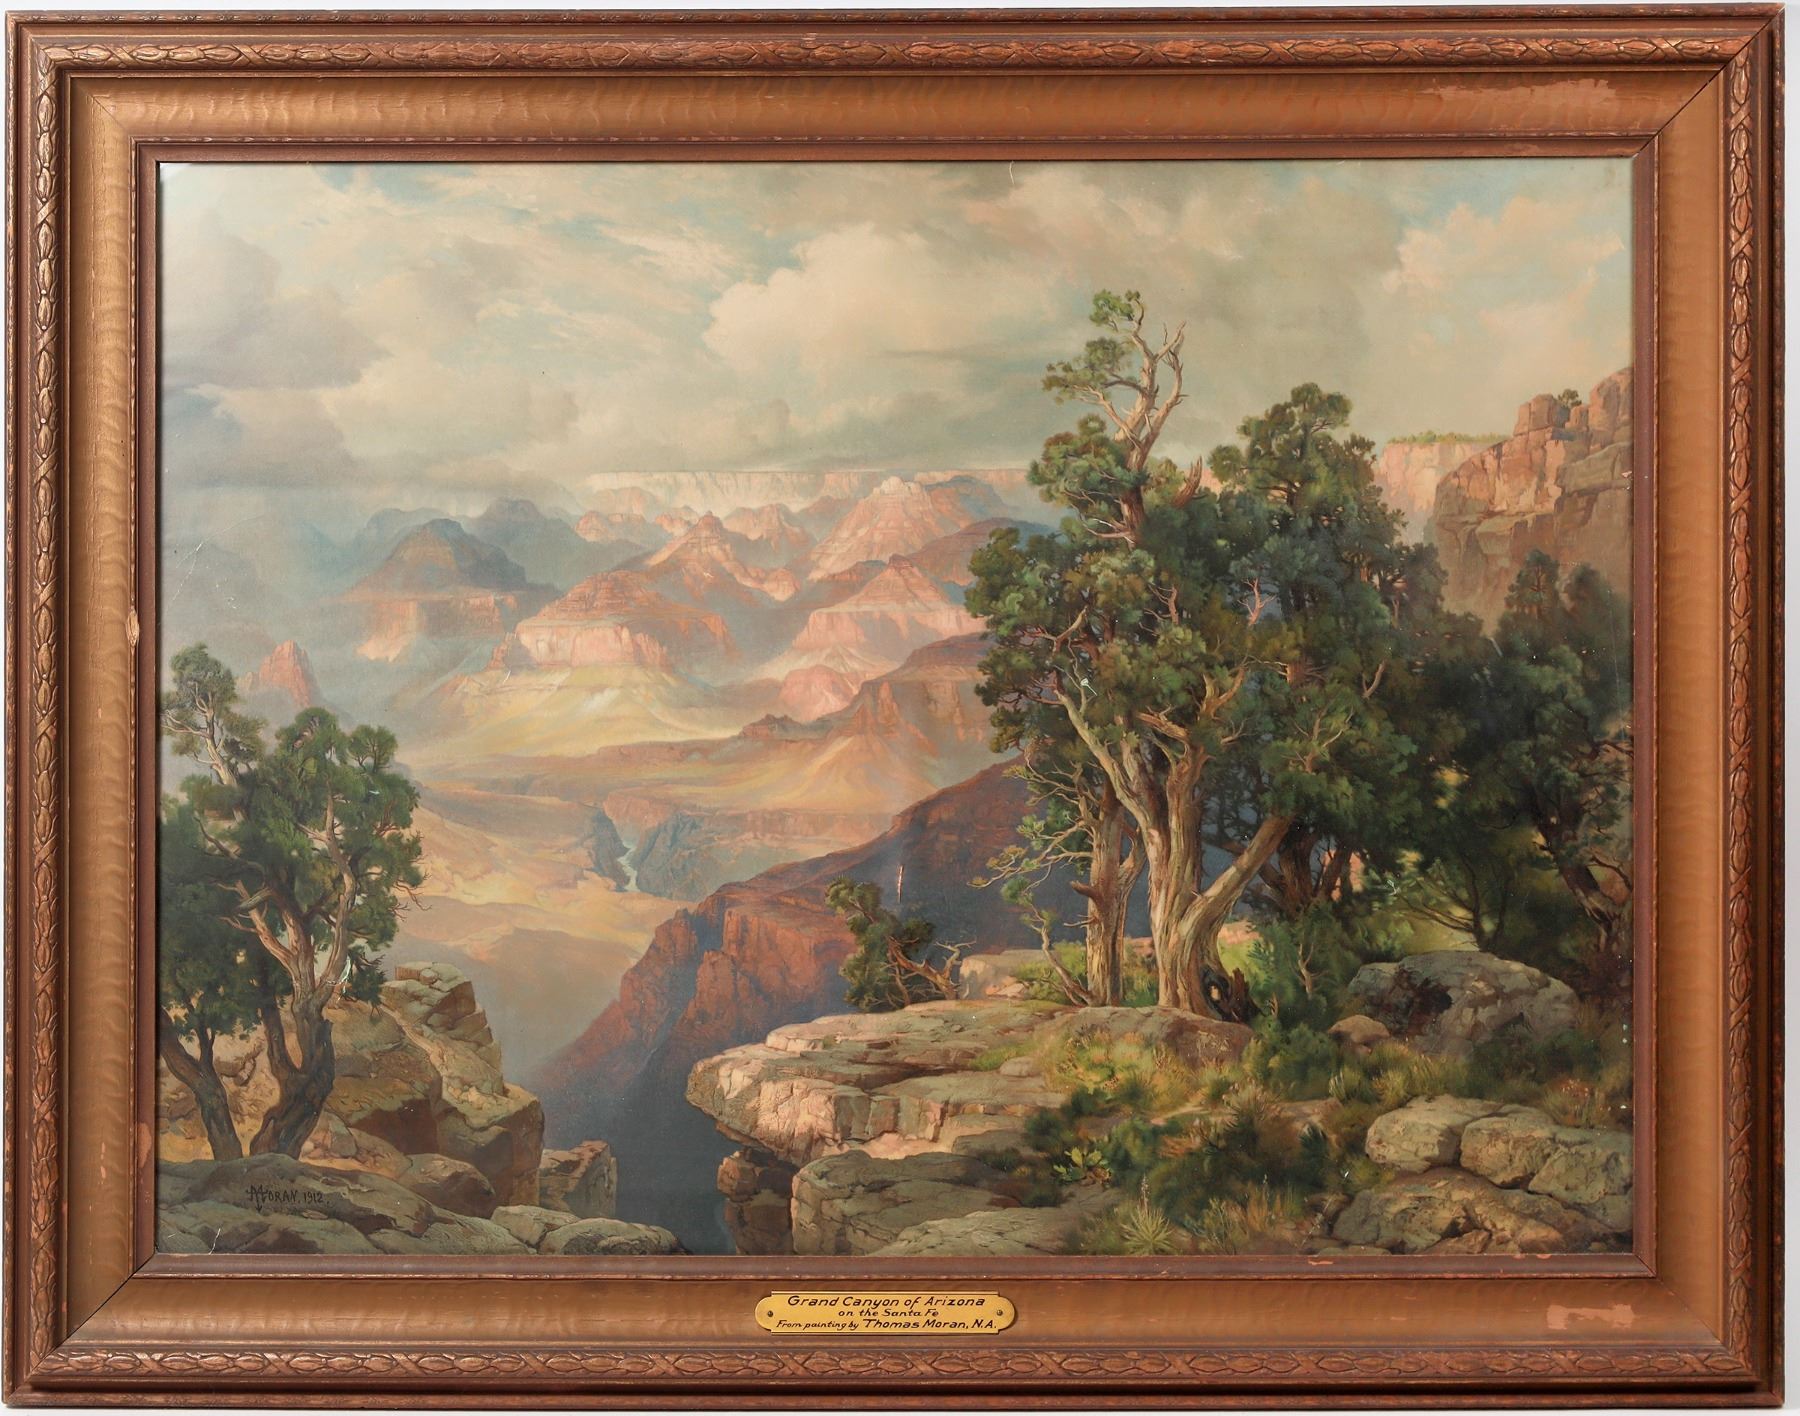 Thomas Moran chromolithograph of the Grand Canyon, signed and dated 1912, est. $4,000-$6,000